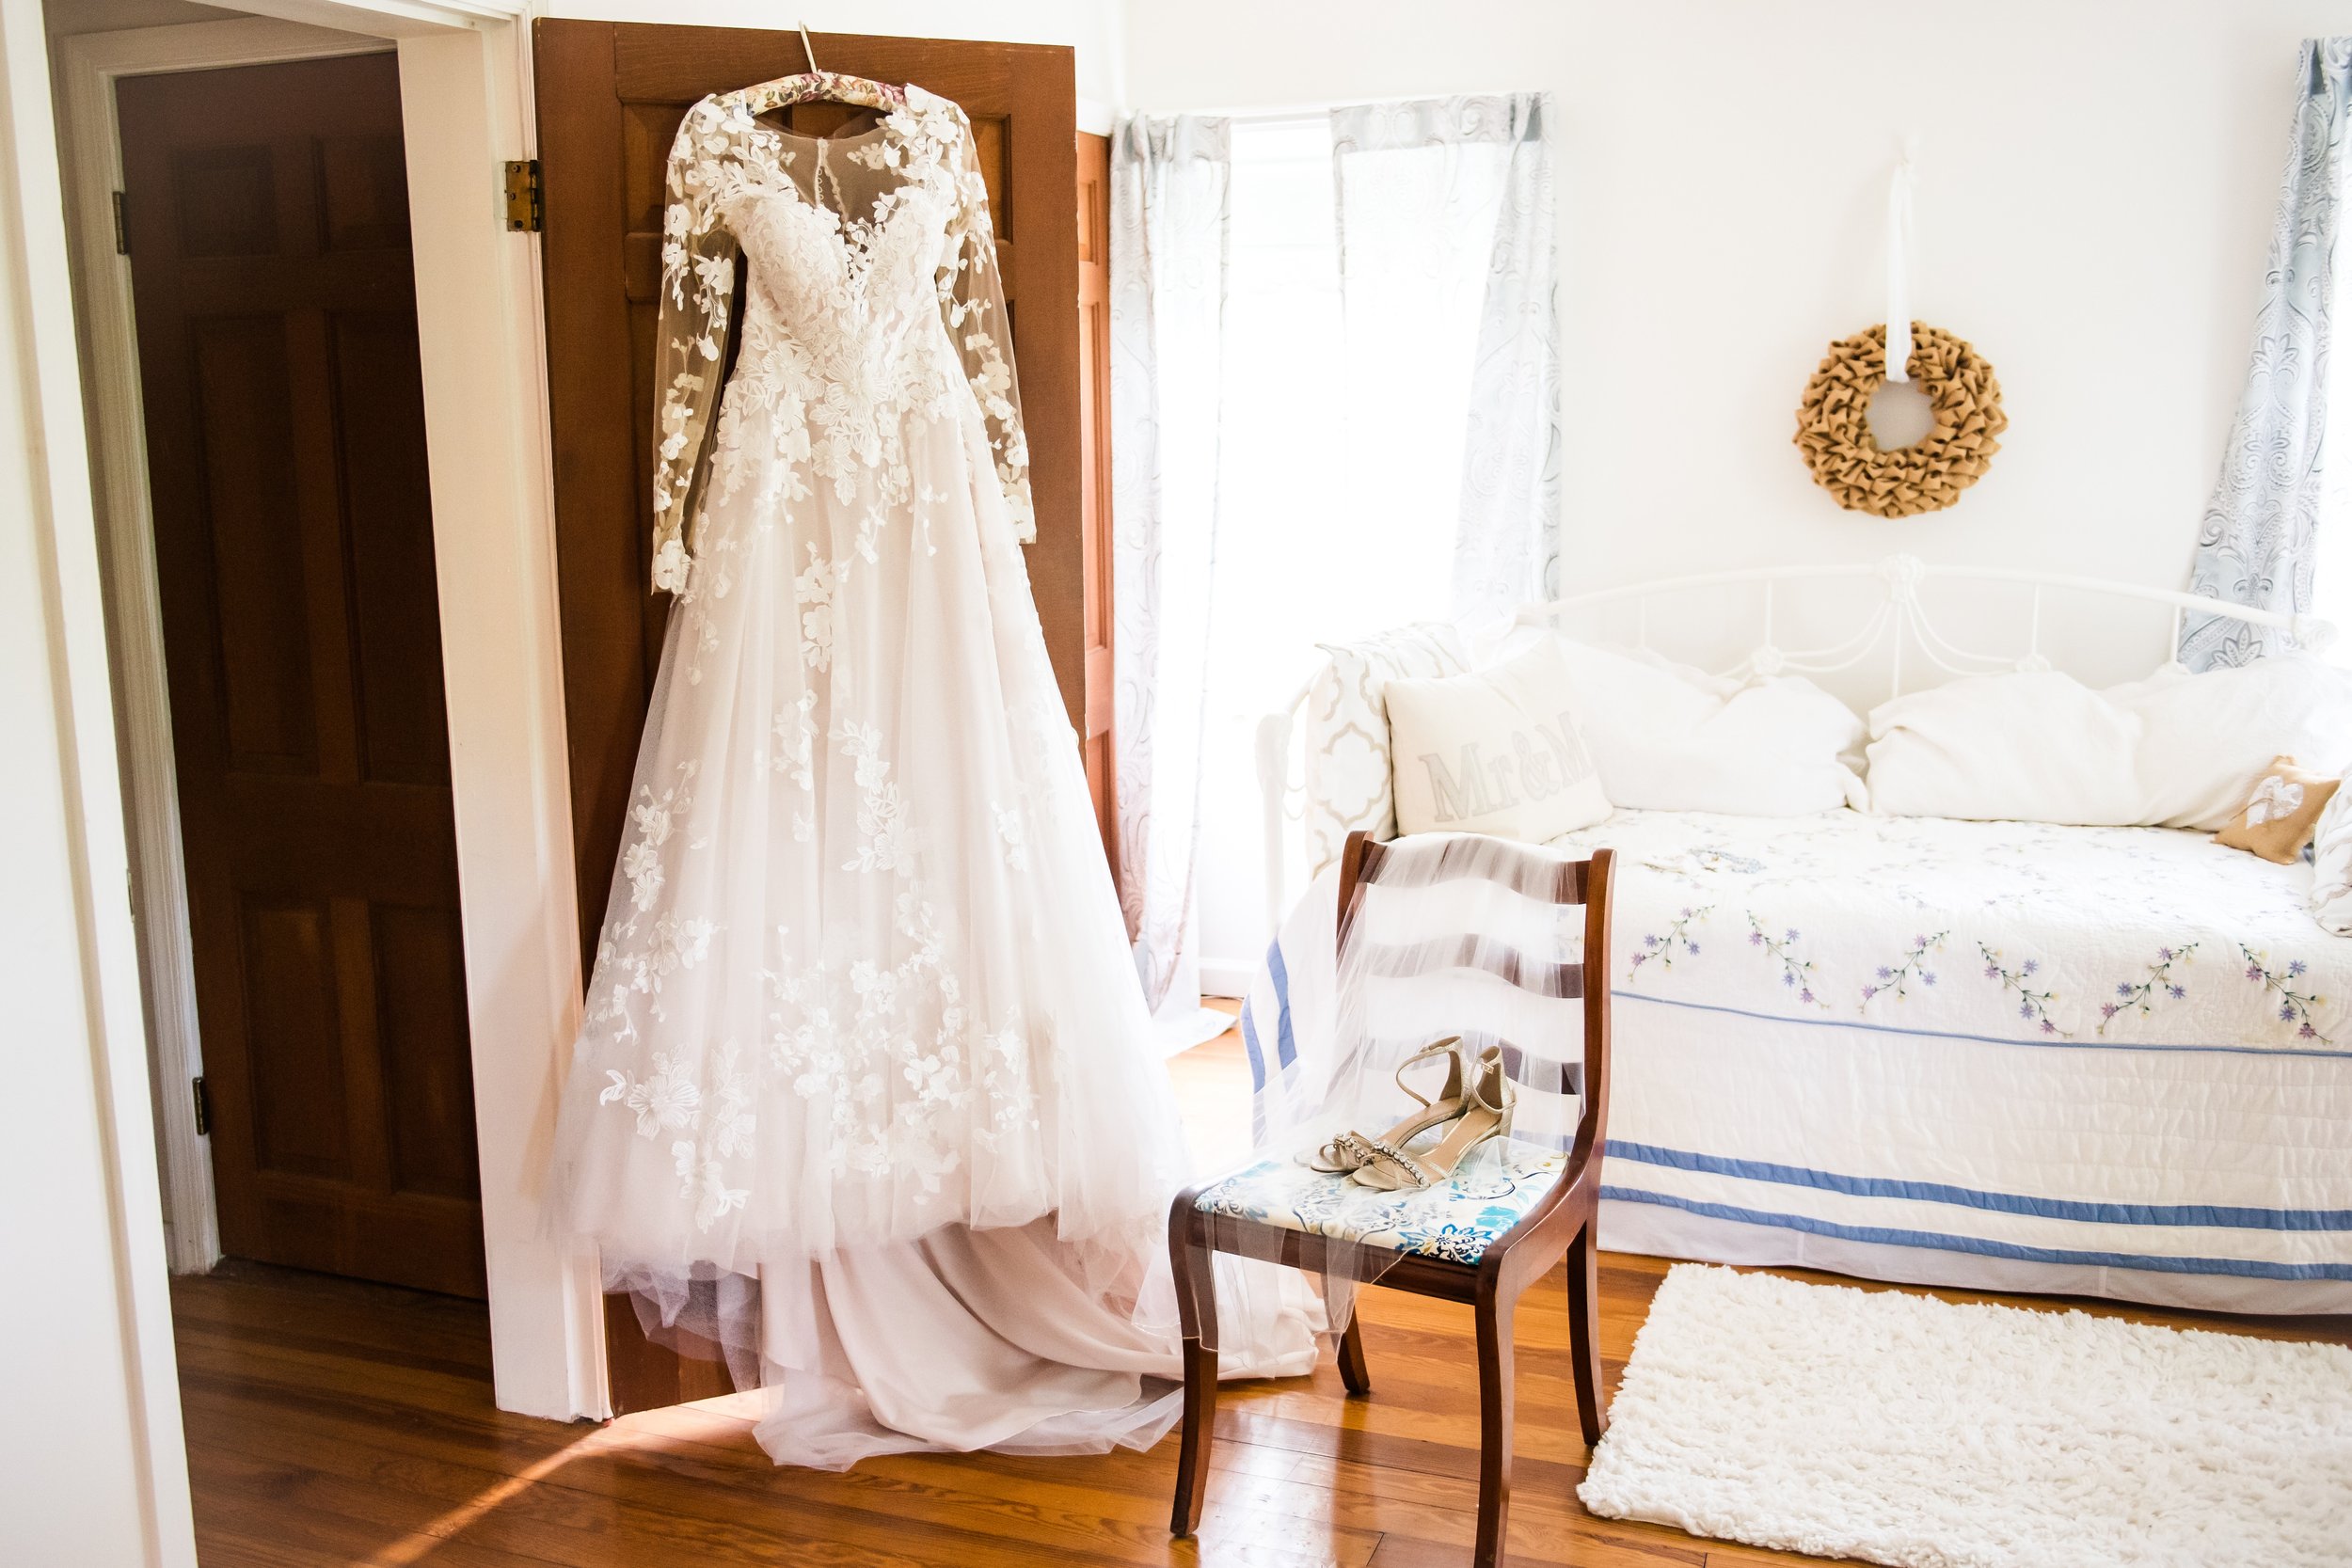 A bride's dress hanging in the getting ready suite before a wedding at The Barns at Hamilton Station Vineyard in Loudoun County, Virginia